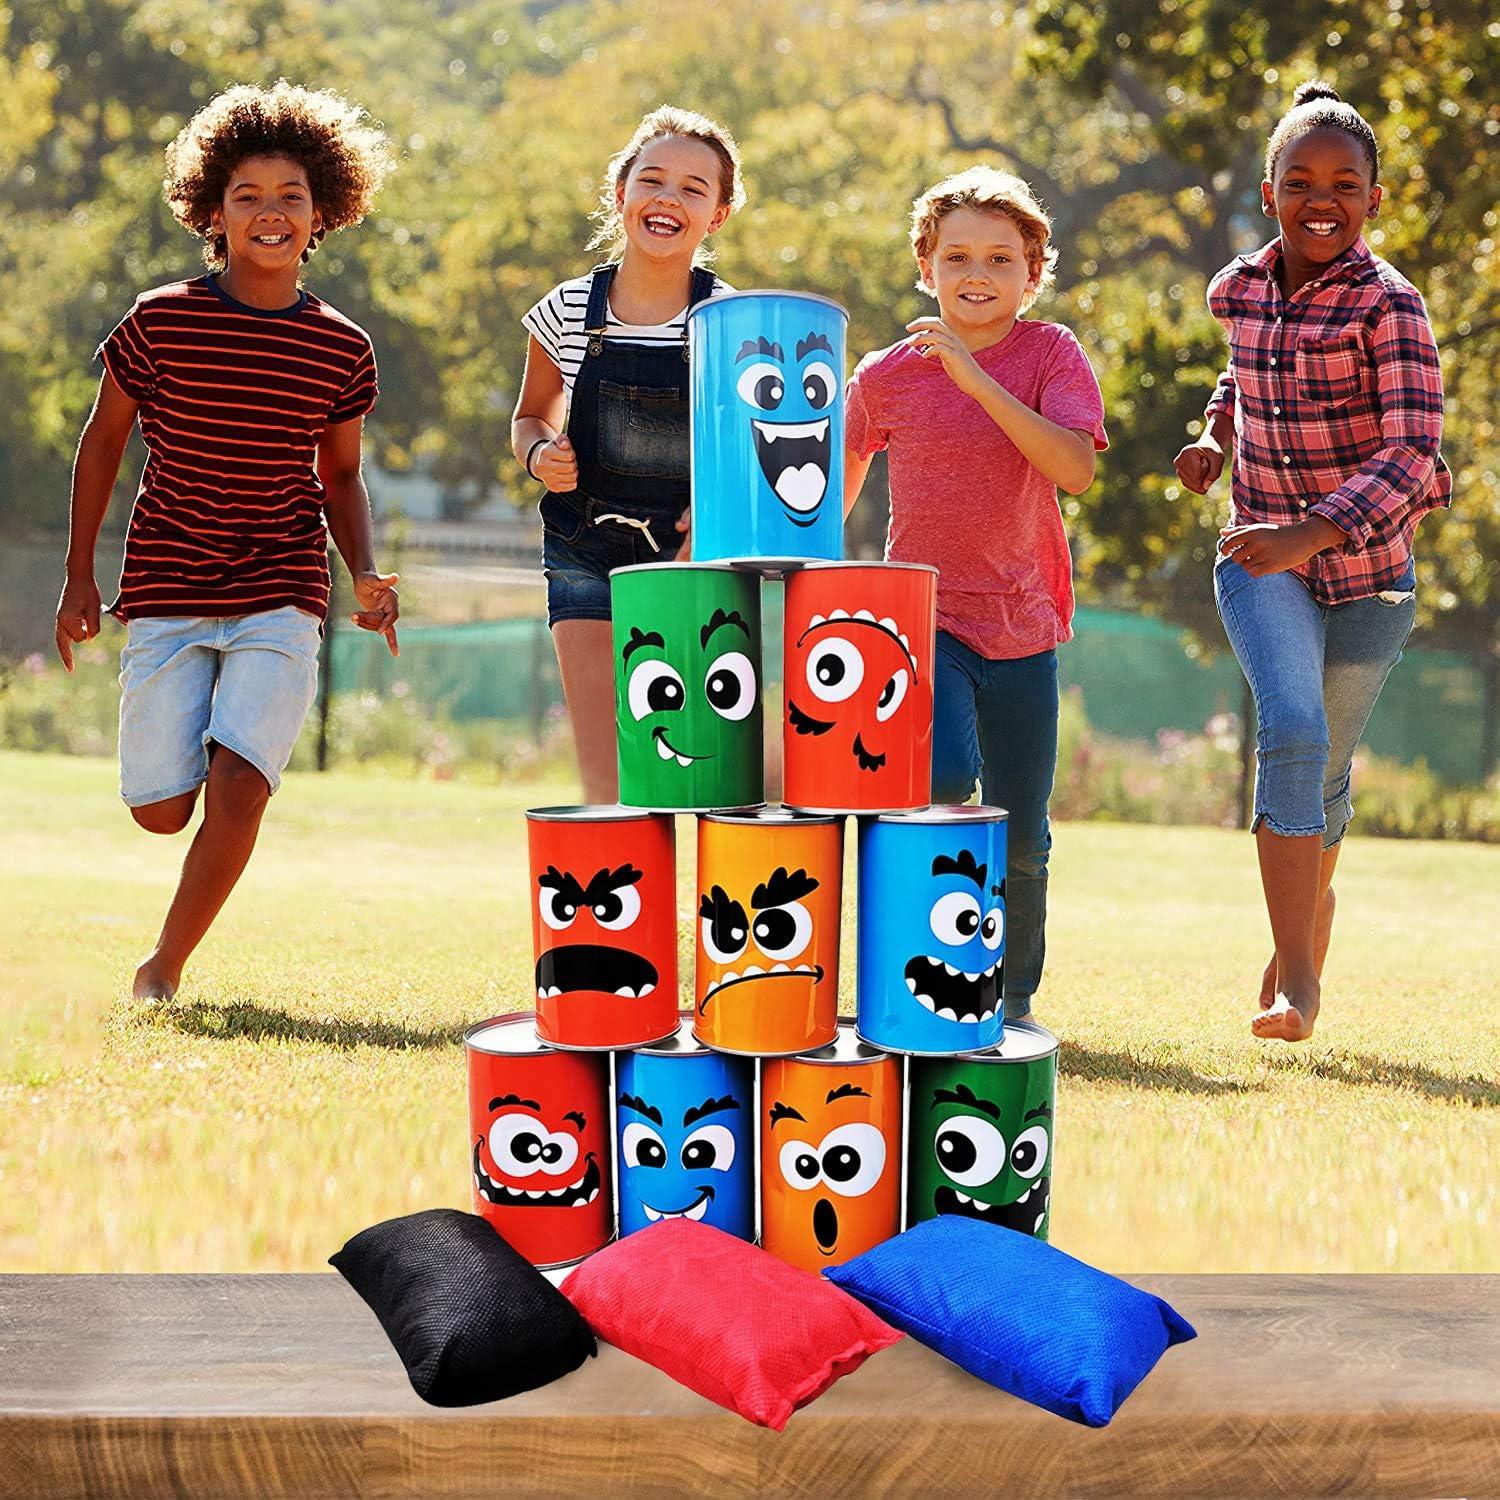 Outdoor Games, Outdoor Bean Bag Toss Game, Backyard and Lawn Game for  Indoor and Outdoor Use,for Adults and Kids